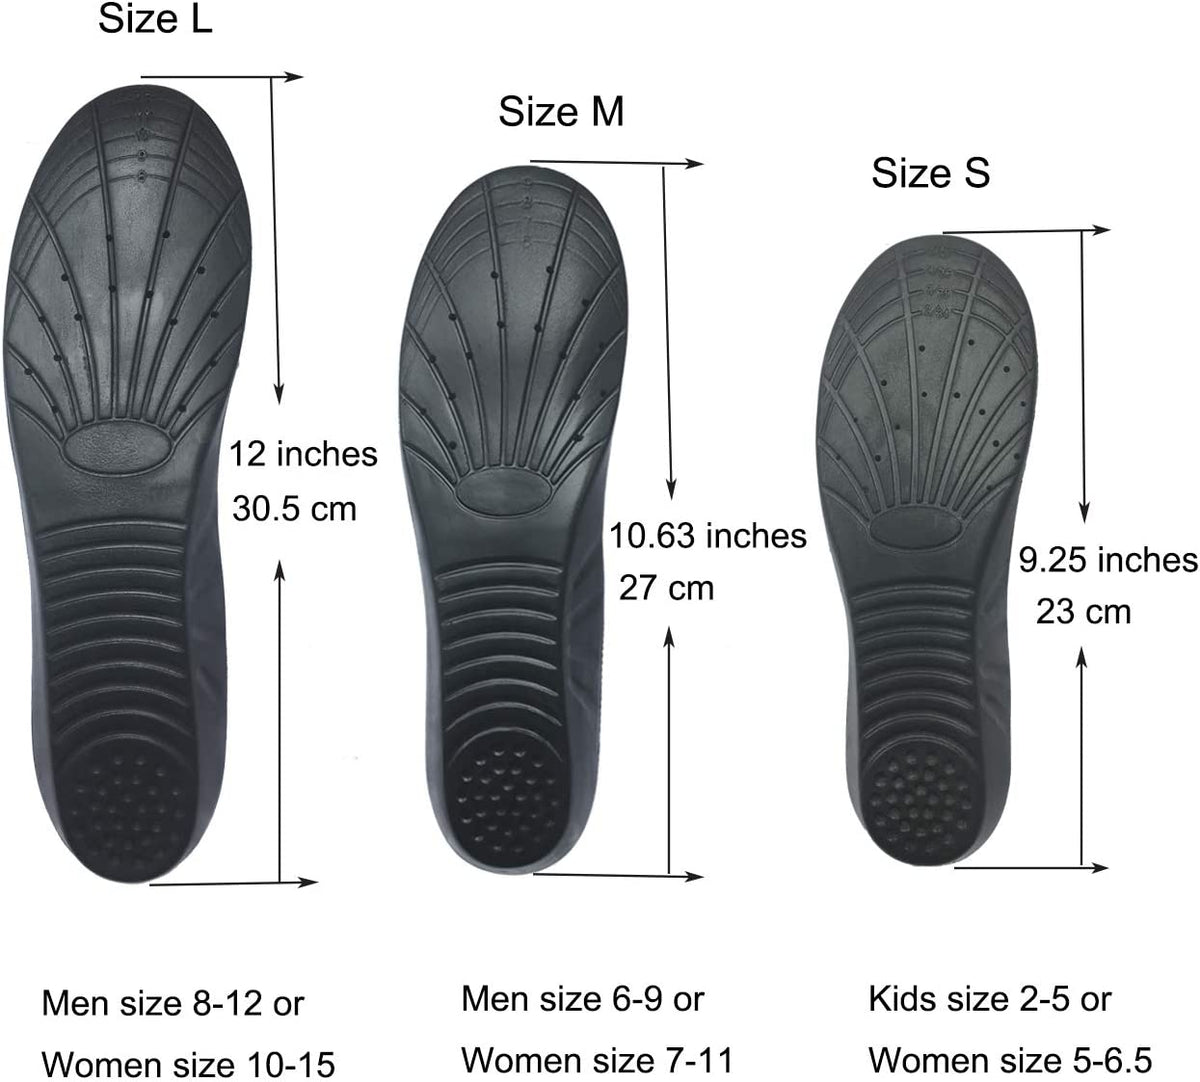 Memory Foam Insoles Shoes Inserts for Men and Women, Kids